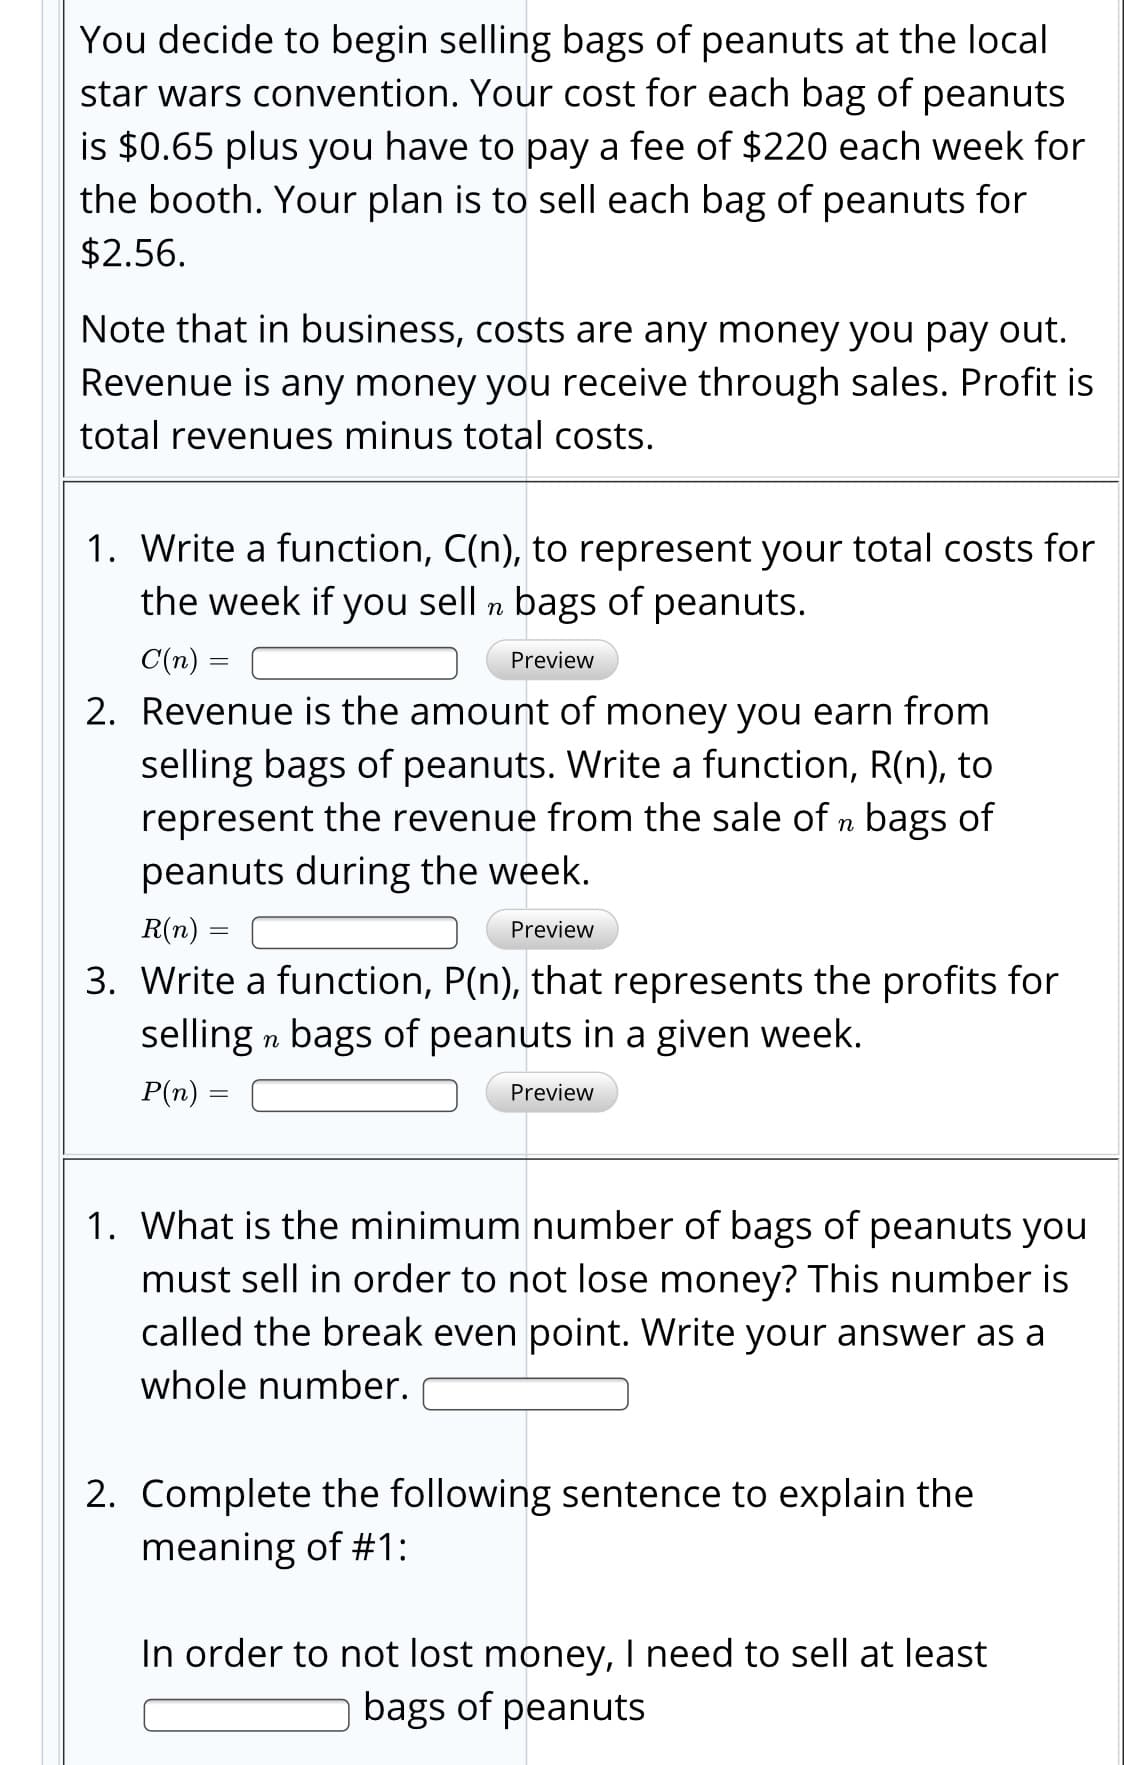 You decide to begin selling bags of peanuts at the local
star wars convention. Your cost for each bag of peanuts
is $0.65 plus you have to pay a fee of $220 each week for
the booth. Your plan is to sell each bag of peanuts for
$2.56.
Note that in business, costs are any money you pay out.
Revenue is any money you receive through sales. Profit is
total revenues minus total costs.
1. Write a function, C(n), to represent your total costs for
the week if you sell n bags of peanuts.
С(п) —
Preview
2. Revenue is the amount of money you earn from
selling bags of peanuts. Write a function, R(n), to
represent the revenue from the sale of n bags of
peanuts during the week.
R(n) =
Preview
3. Write a function, P(n), that represents the profits for
selling n bags of peanuts in a given week.
P(п) %3D
Preview
1. What is the minimum number of bags of peanuts you
must sell in order to not lose money? This number is
called the break even point. Write your answer as a
whole number.
2. Complete the following sentence to explain the
meaning of #1:
In order to not lost money, I need to sell at least
bags of peanuts
